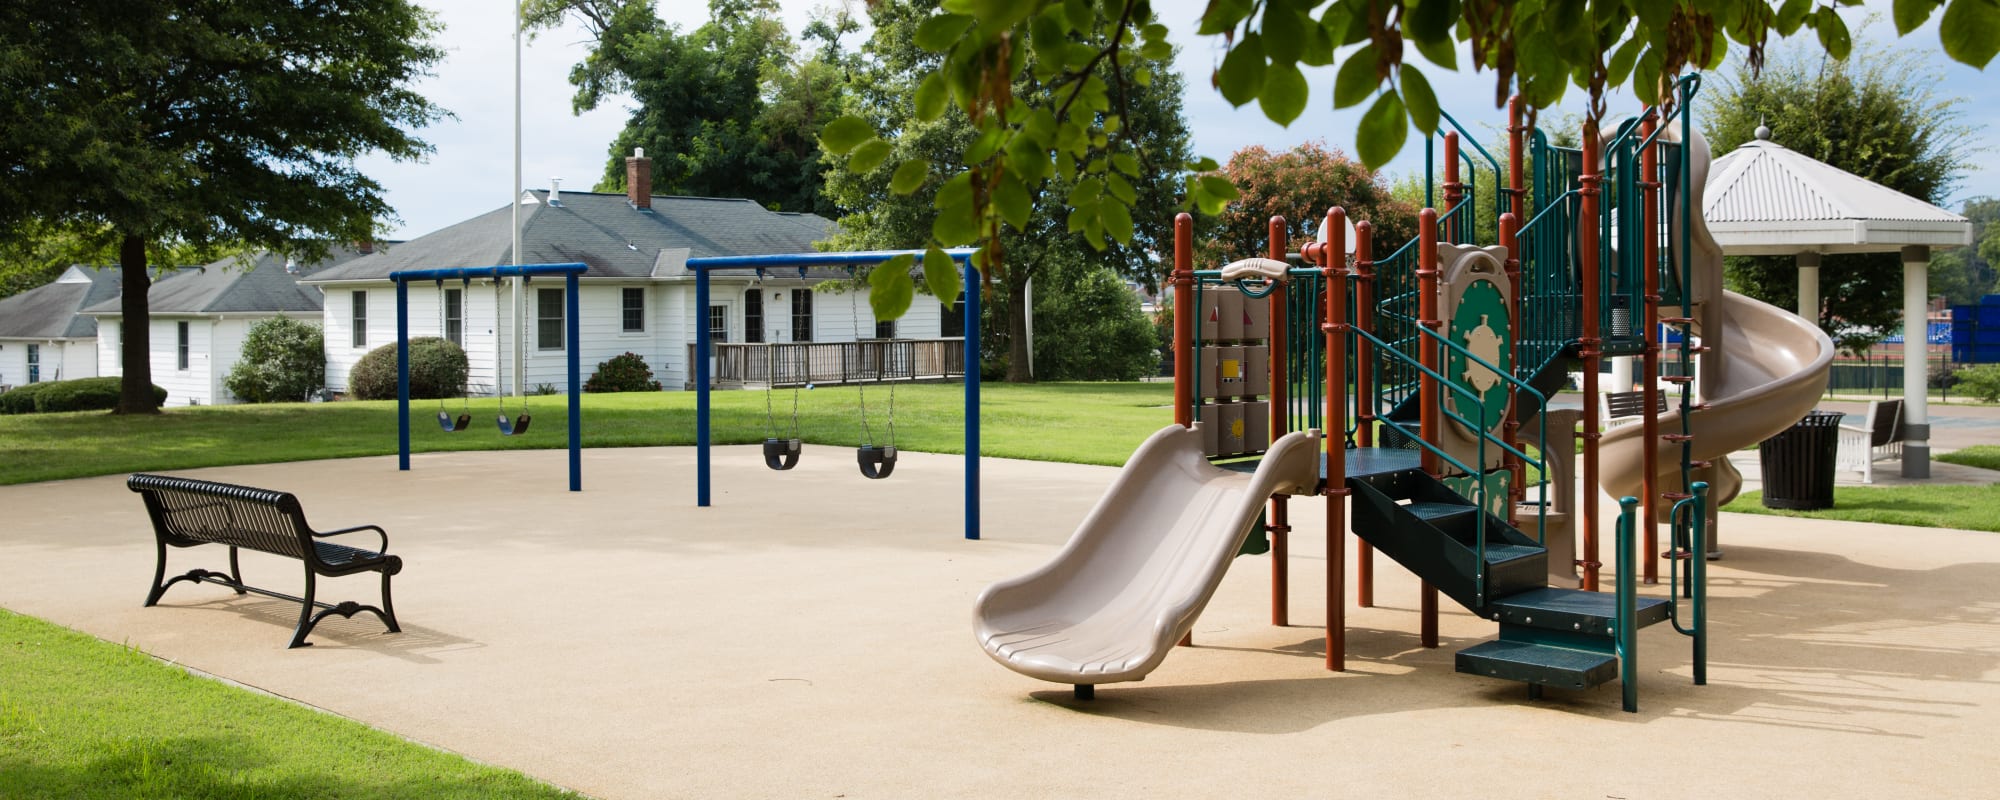 Playground at Phythian Road in Annapolis, Maryland